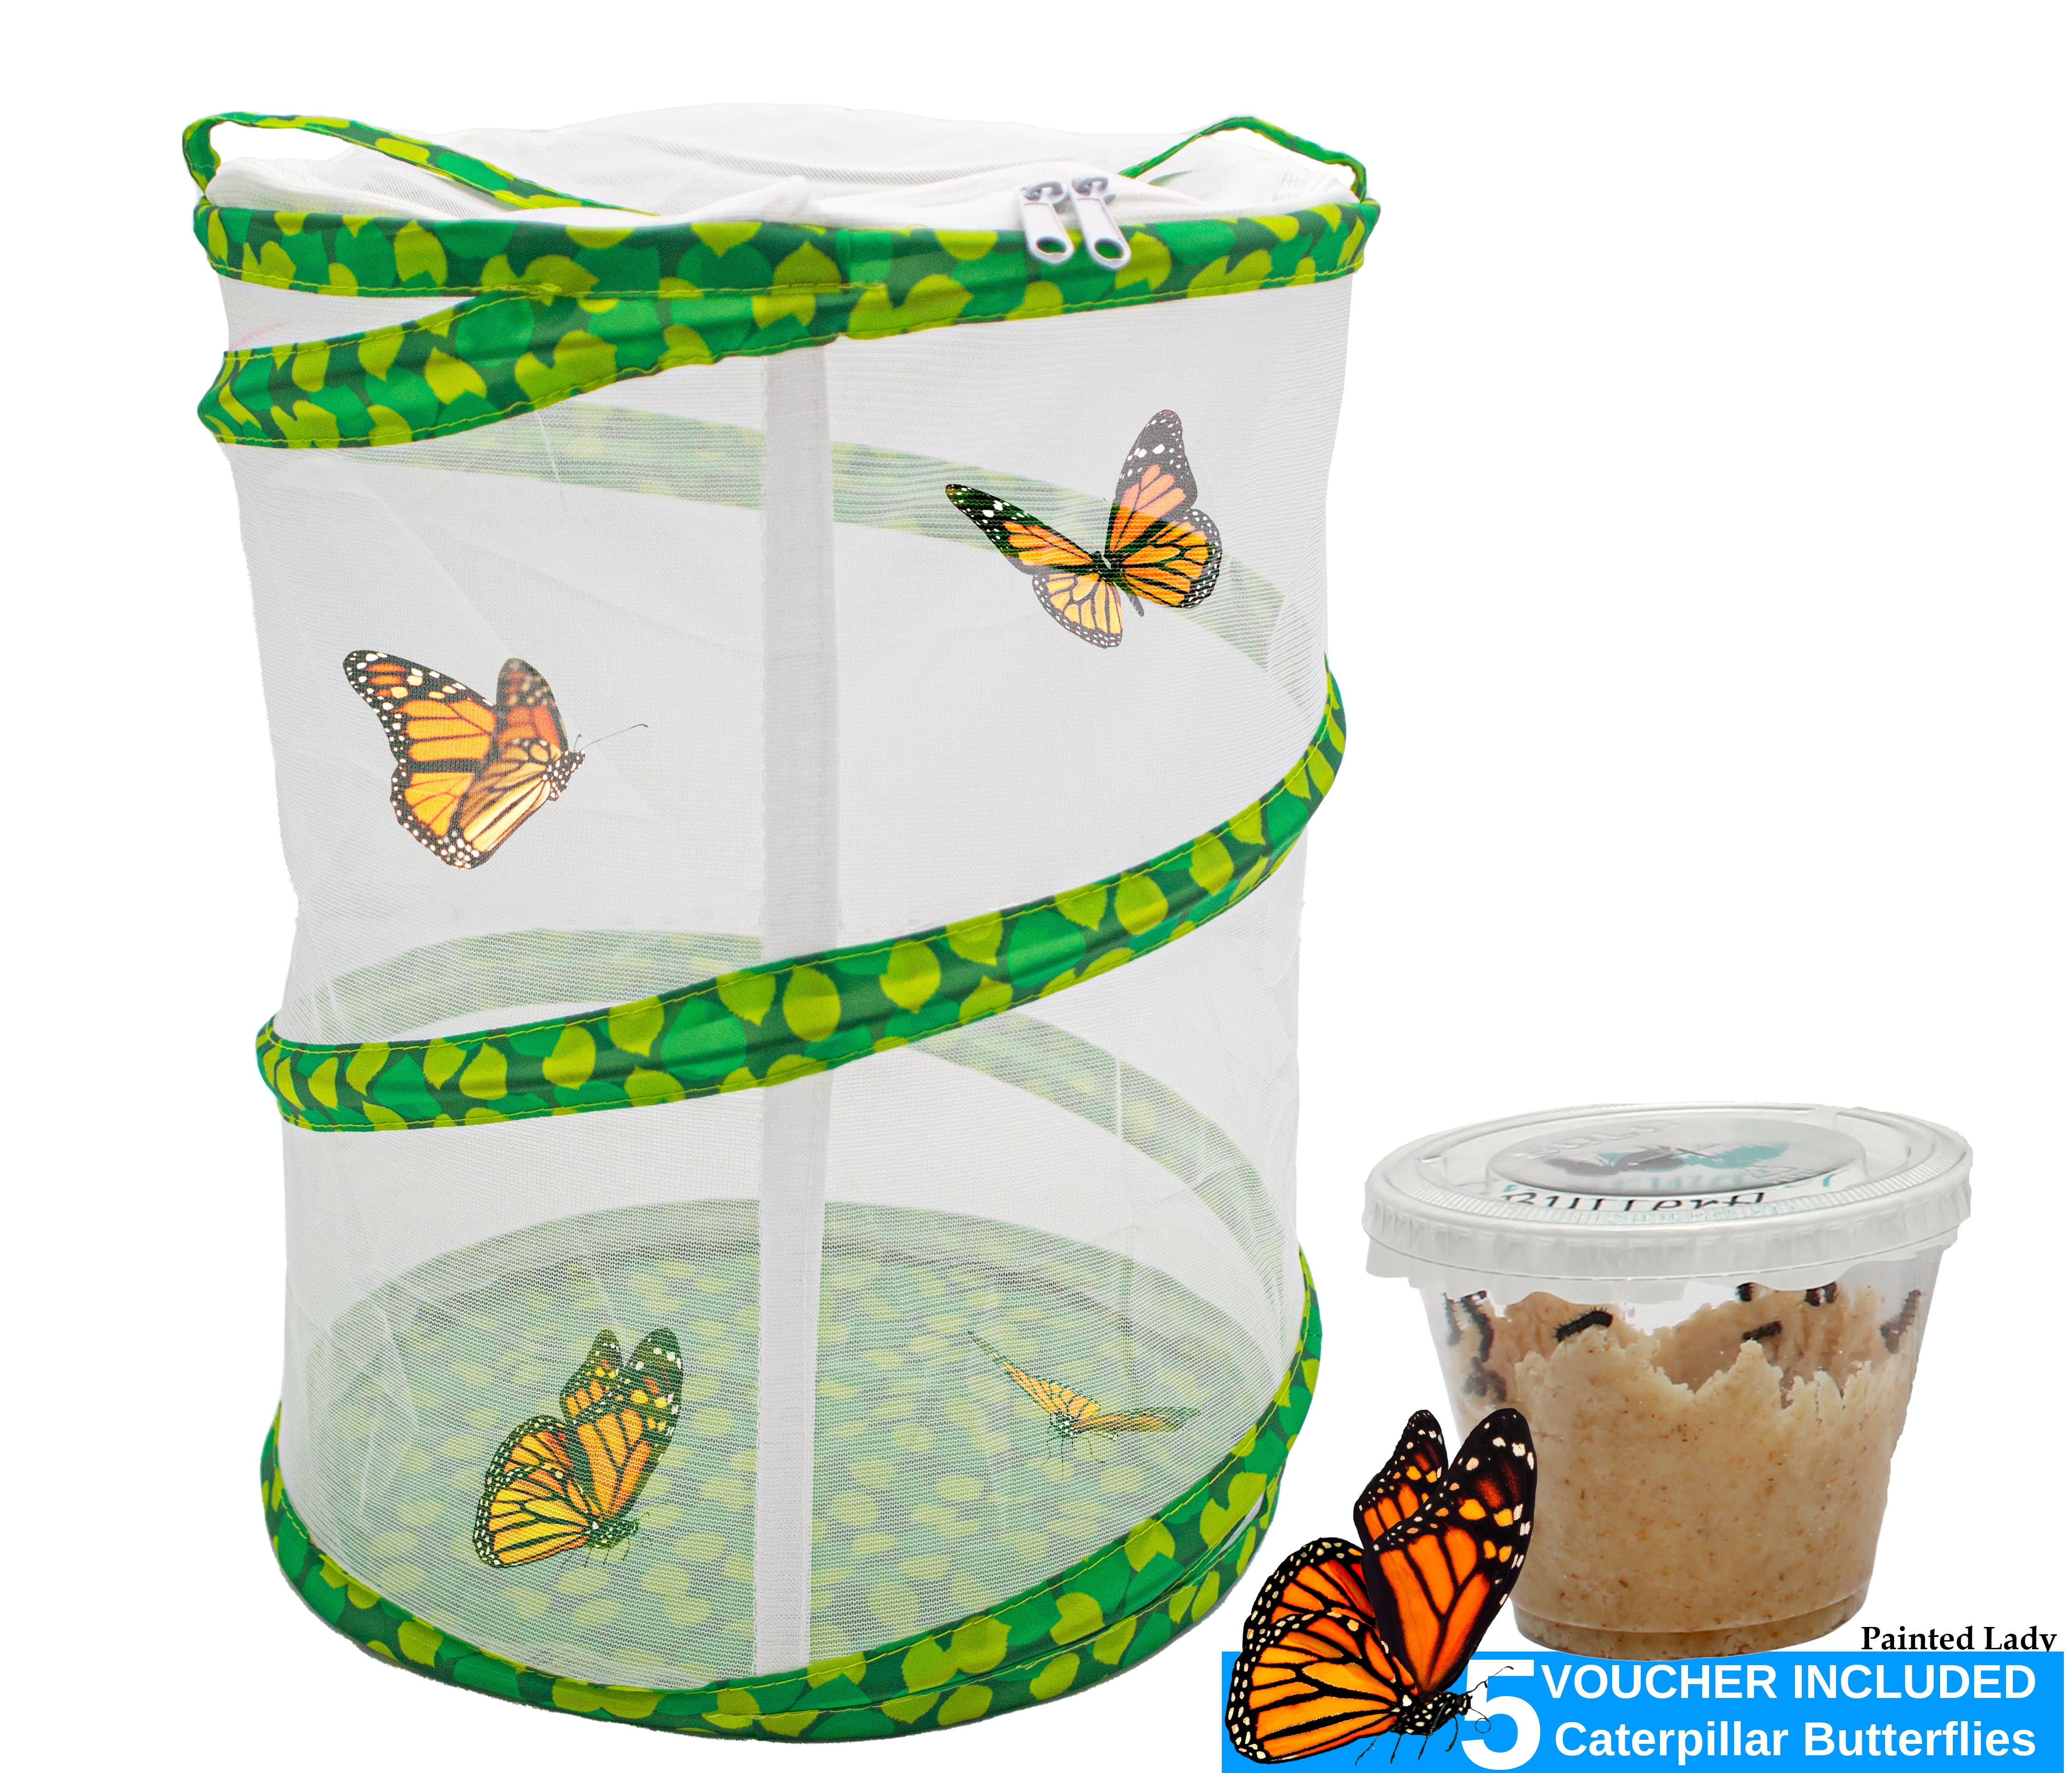 STOBOK Butterfly Habitat Cage Collapsible Insect Mesh Cage Bug Terrarium with Handle for Kids Observation Easy Viewing